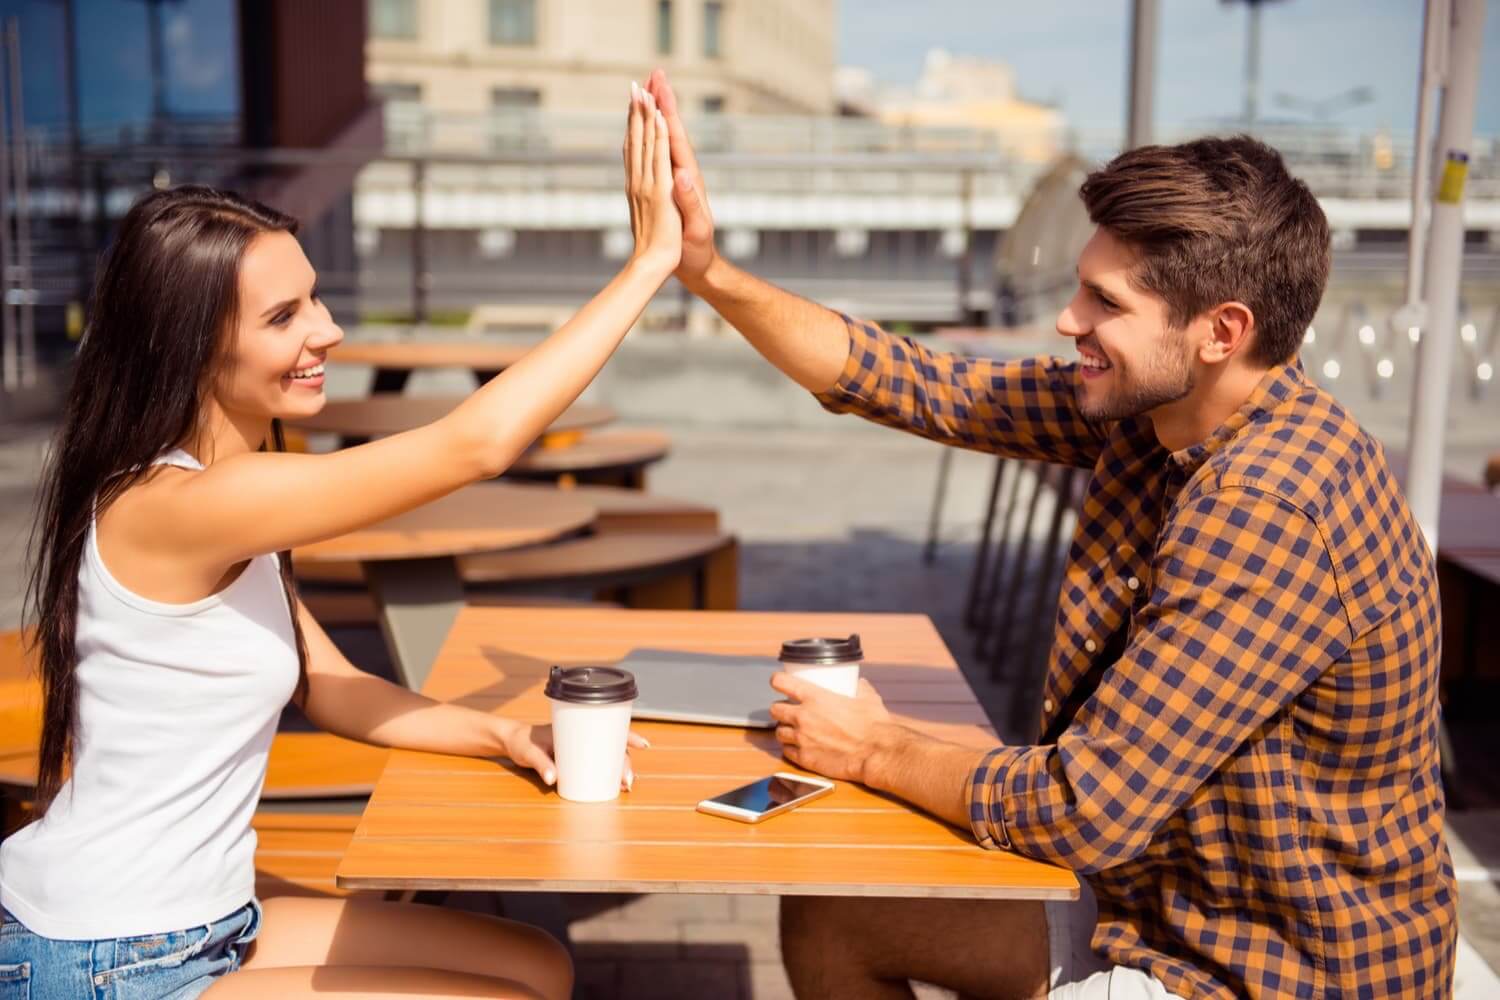 Friendship between a man and a woman — what the science says?